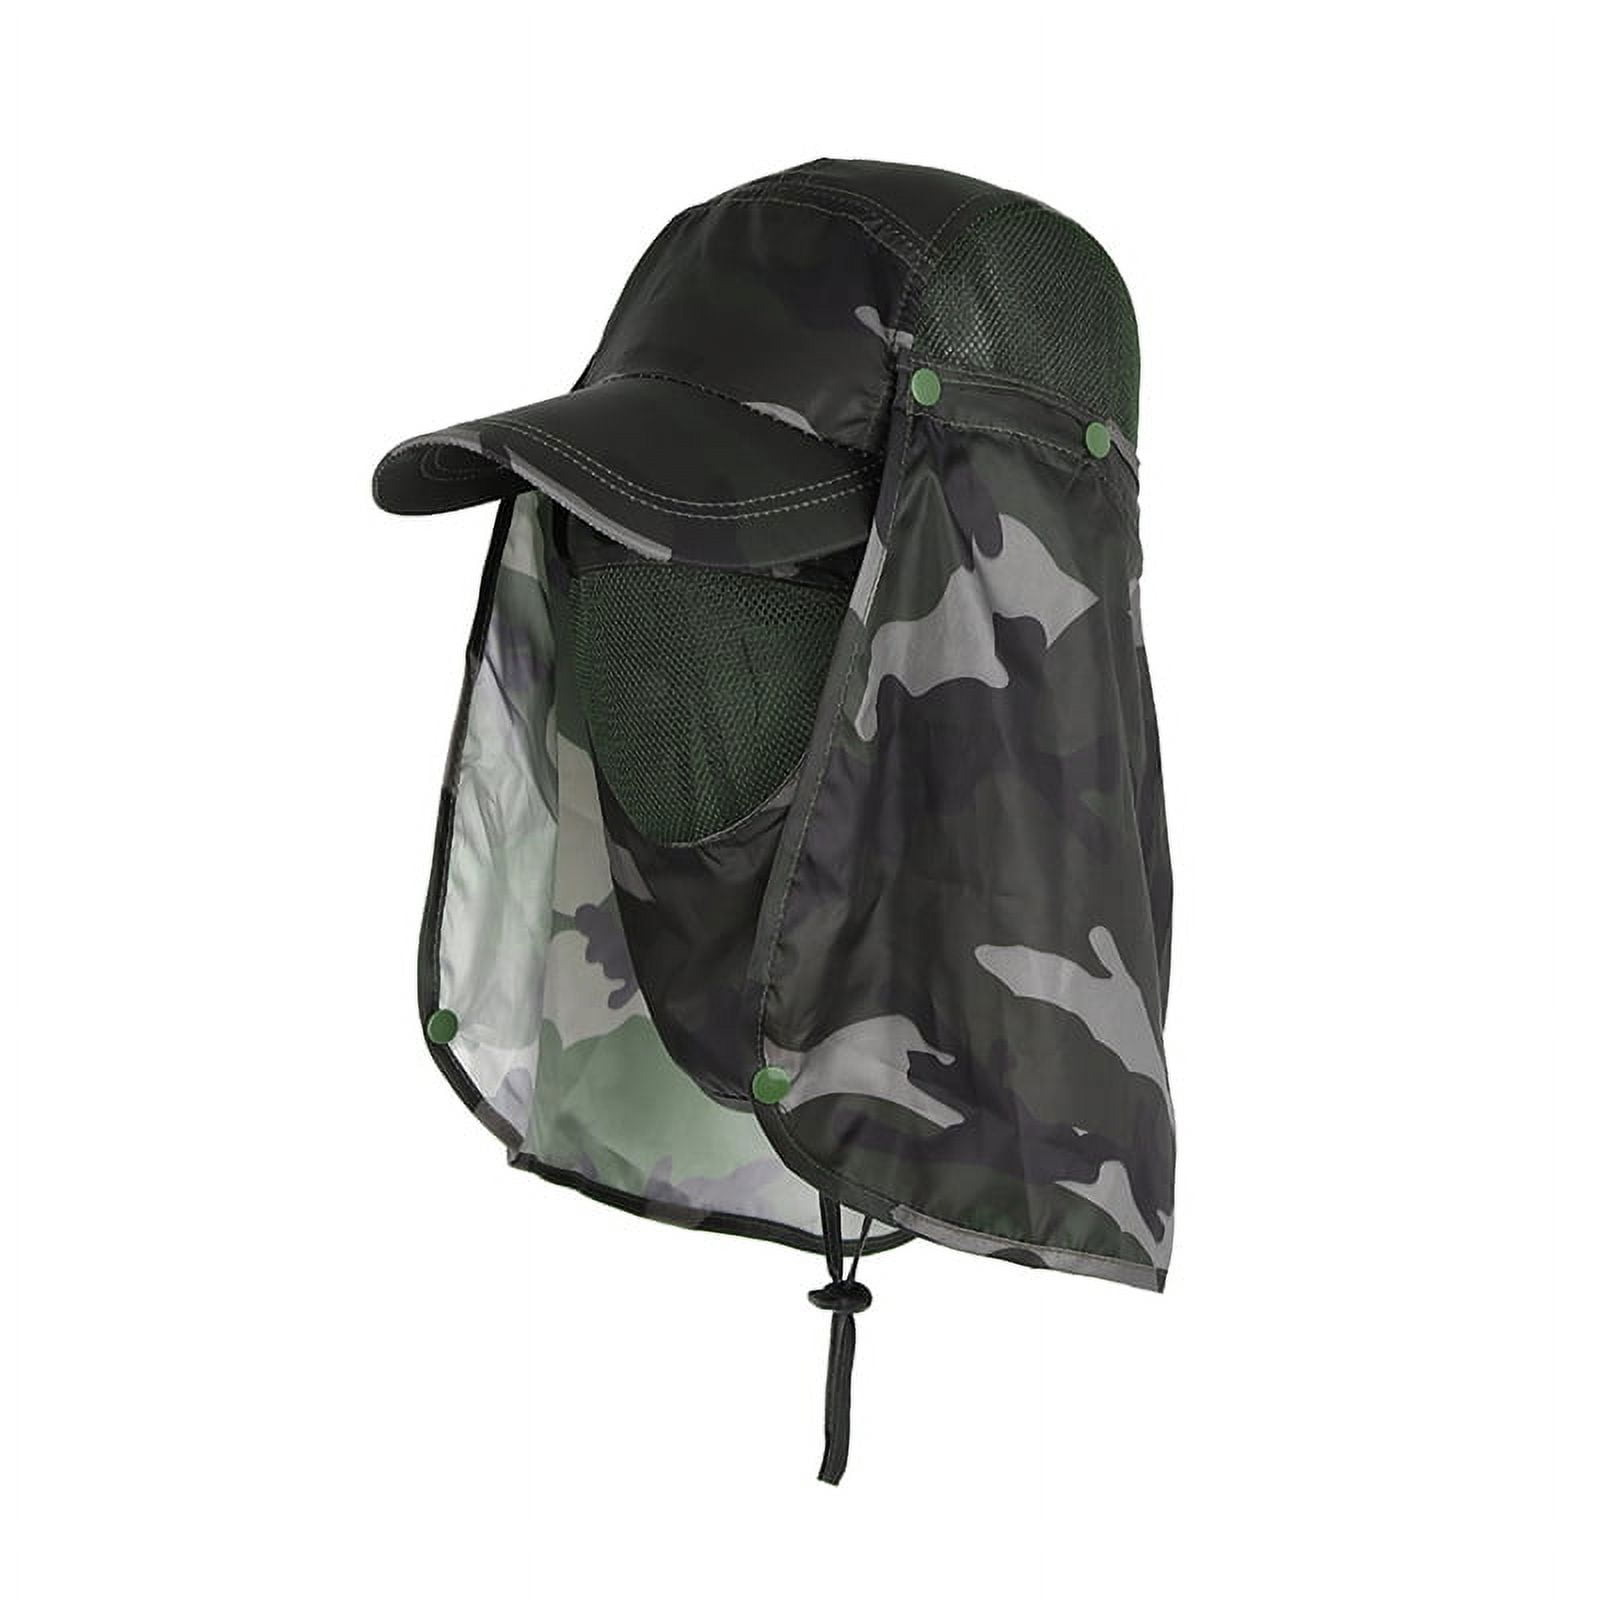 Fishing Caps For Men Women Sun Protection,Removable Ear Neck Cover Outdoor  Sunshade